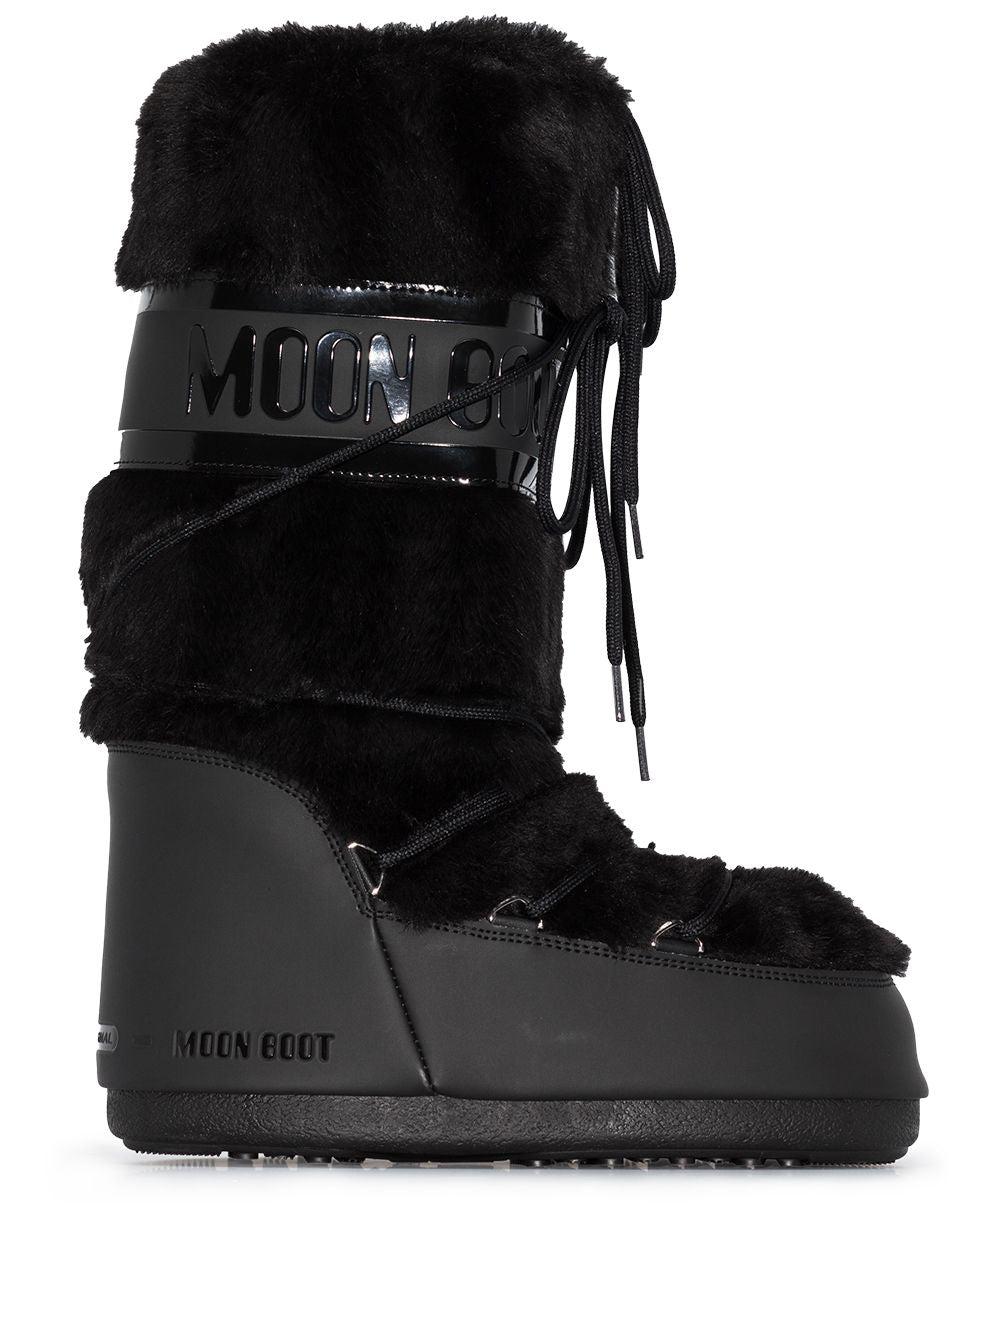 Moon Boot Boots Black - Save 23% | Lyst